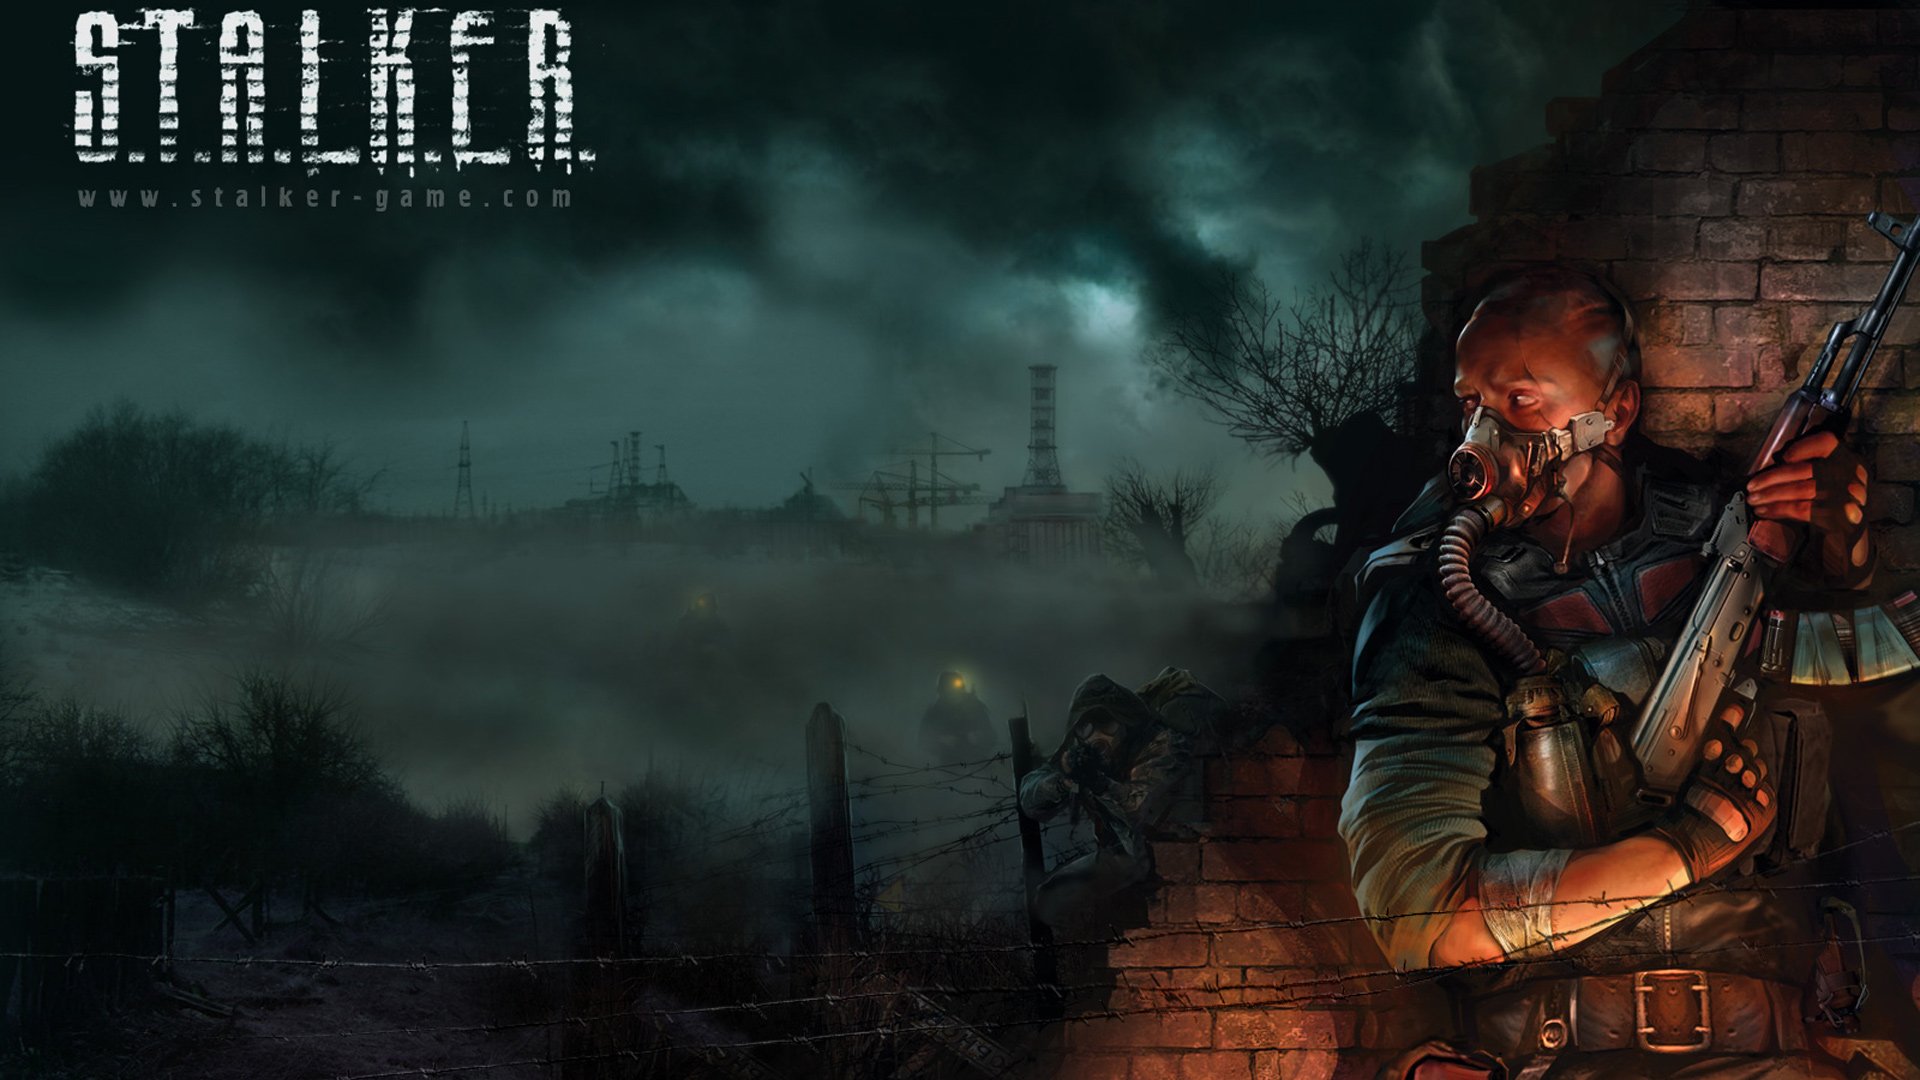 for android instal S.T.A.L.K.E.R. 2: Heart of Chernobyl